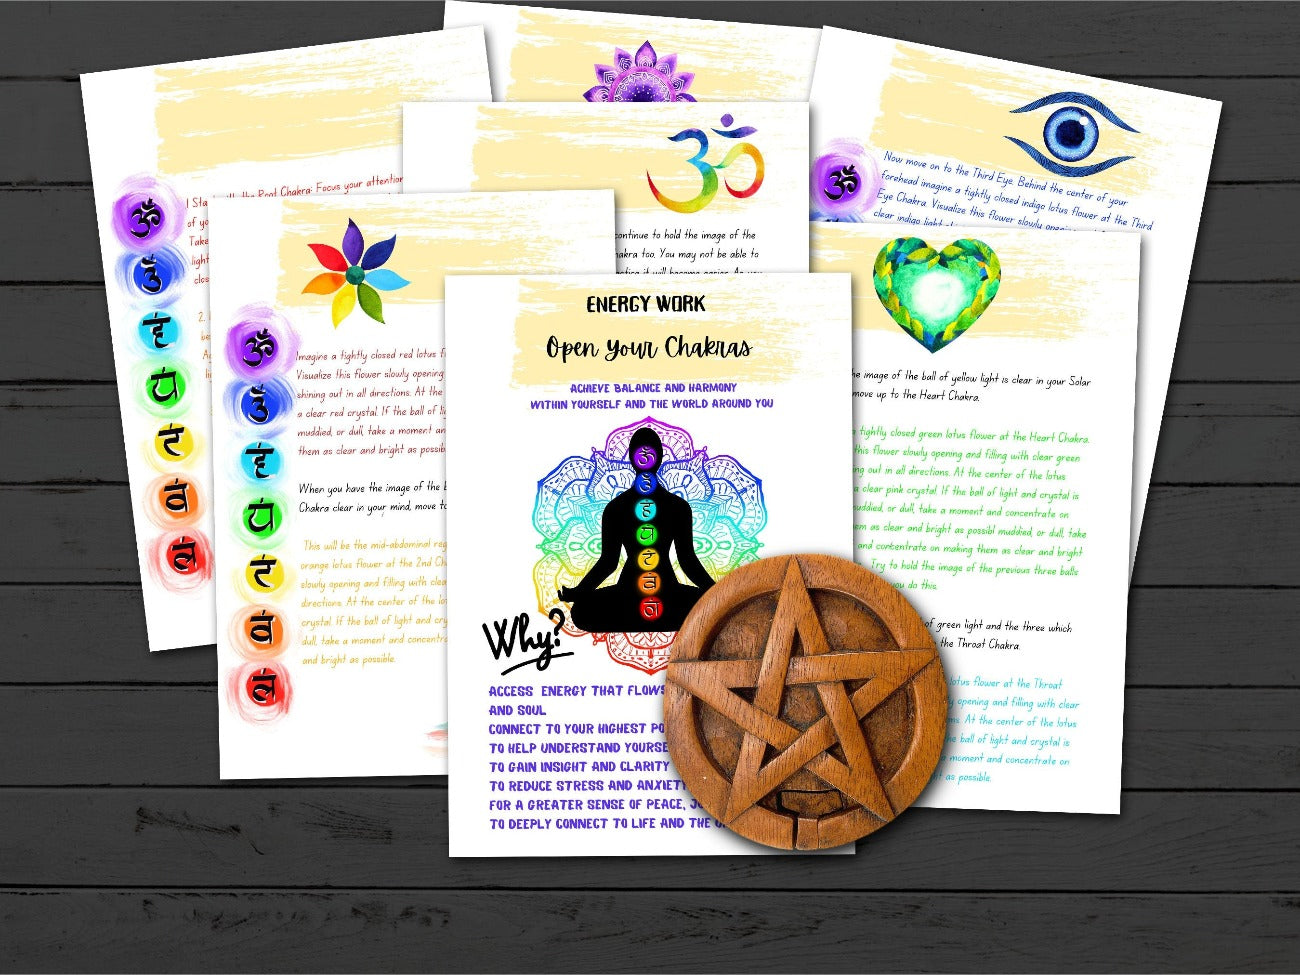 WICCA ZINE Lesson 4 - Learn Wicca, Witchcraft Course Printable, Wheel of the Year